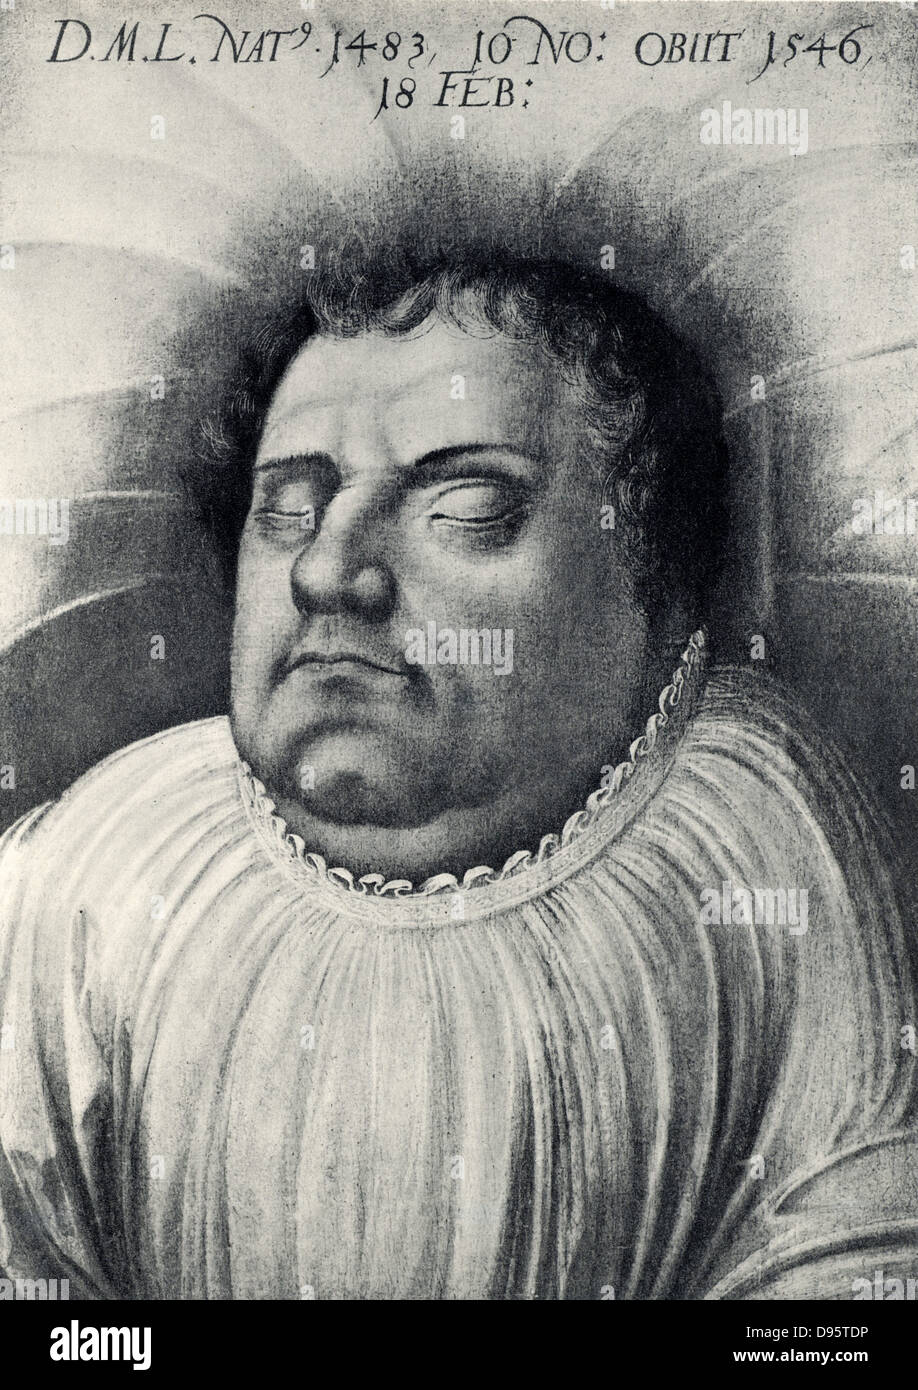 Martin Luther (1483-1546) German Protestant reformer, on his deathbed. Stock Photo